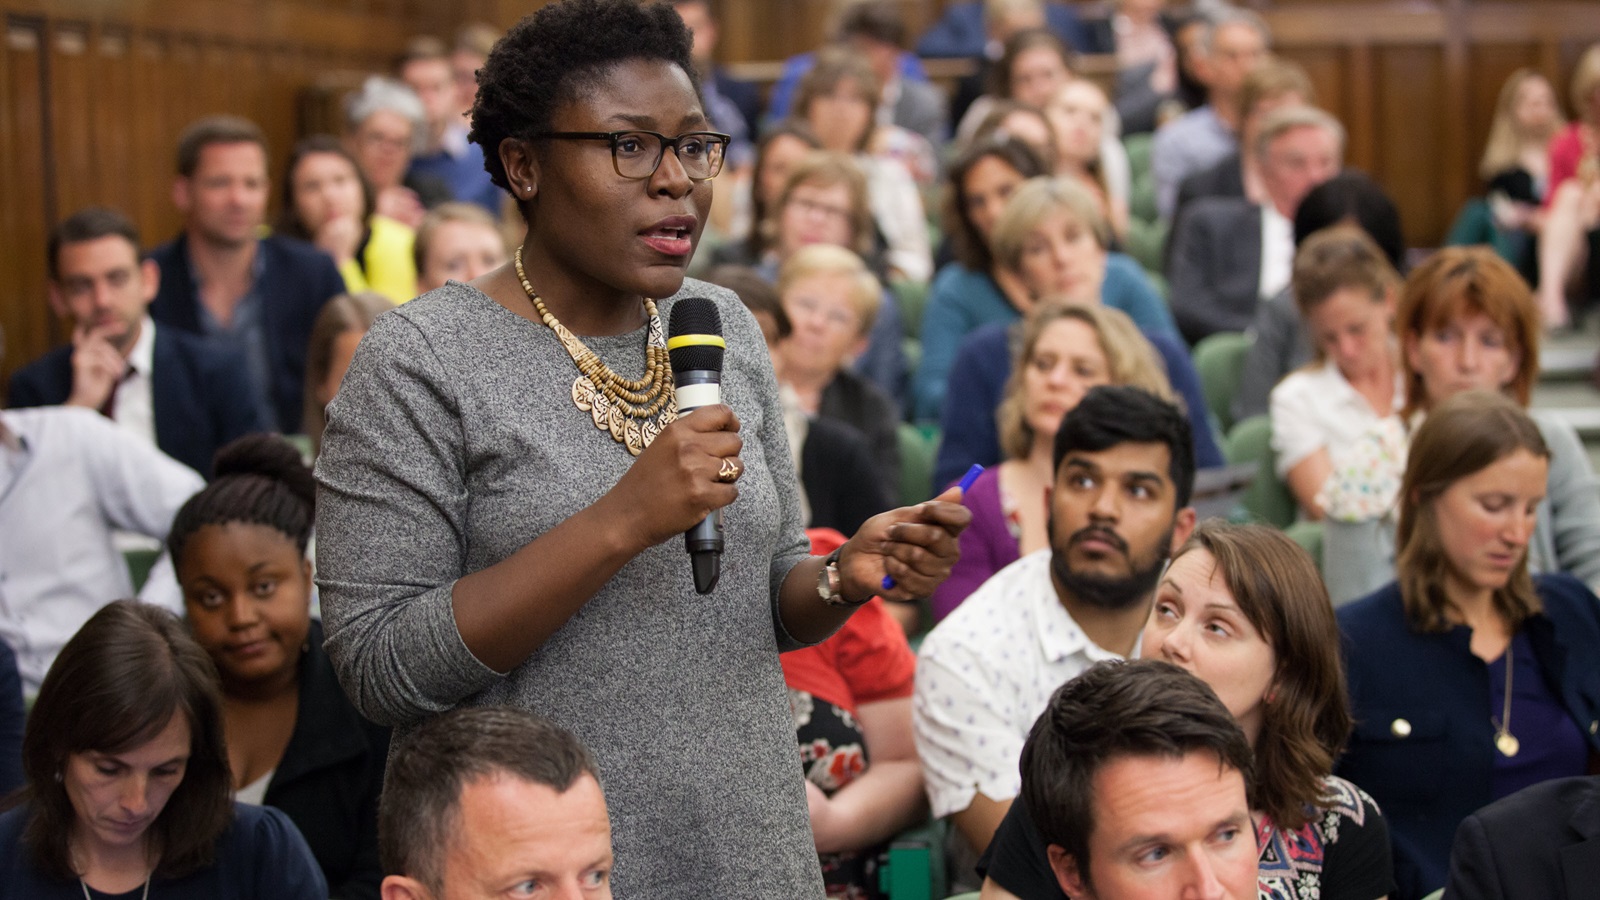 Member of the audience asks a question at the One Great George Street Conference Center during a discussion entitled: Family Planning - the rights of girls and women.